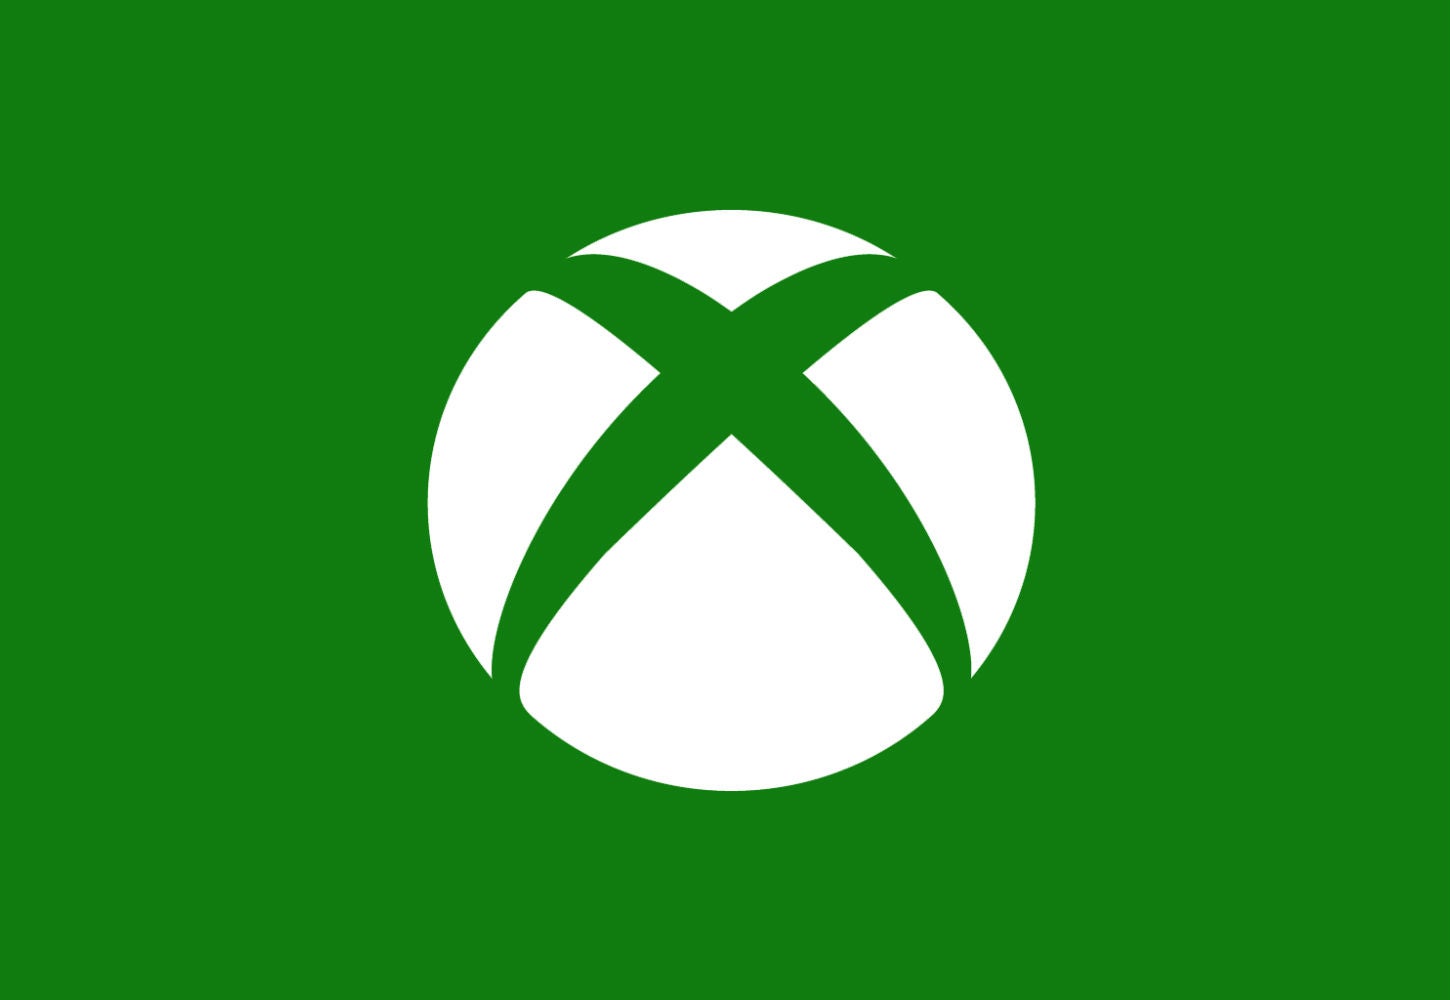 Image for Microsoft considered also dropping its revenue cut to 12% on Xbox, according to legal documents